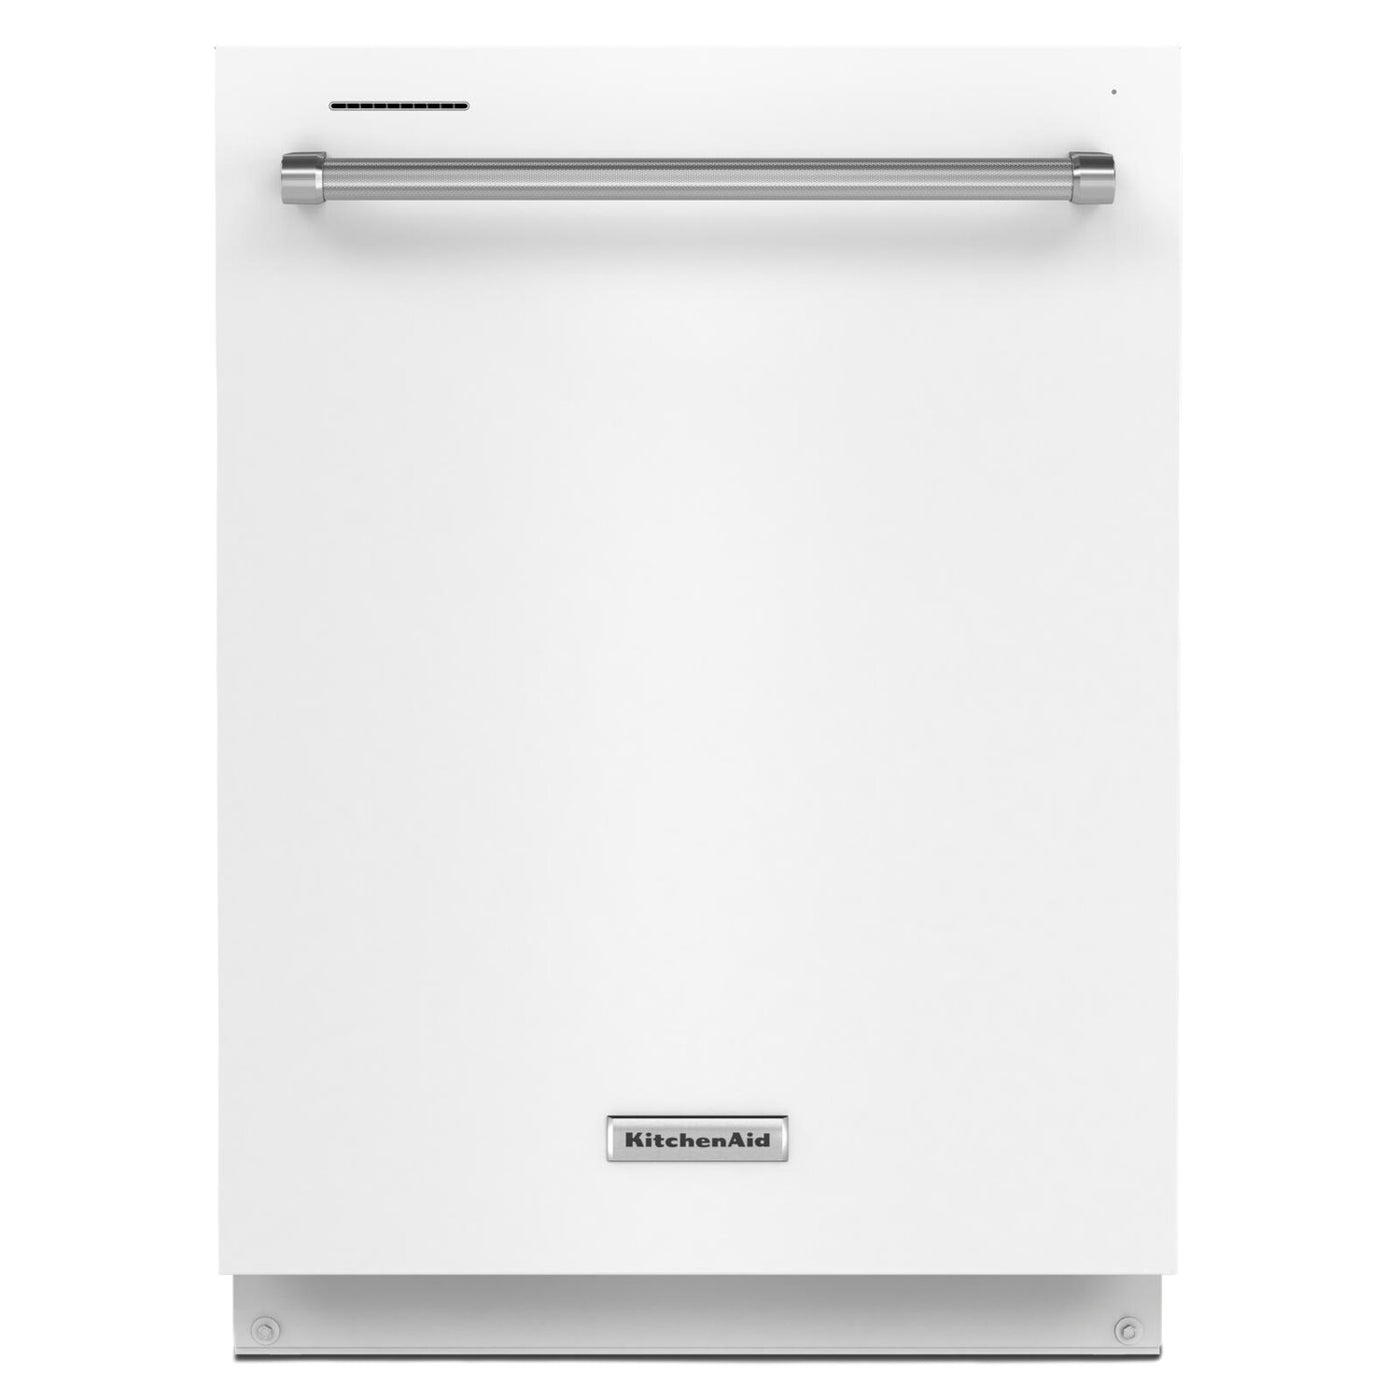 Kitchenaid 39 Db Top Control Dishwasher With Third Level Kdte204kwh The Brick